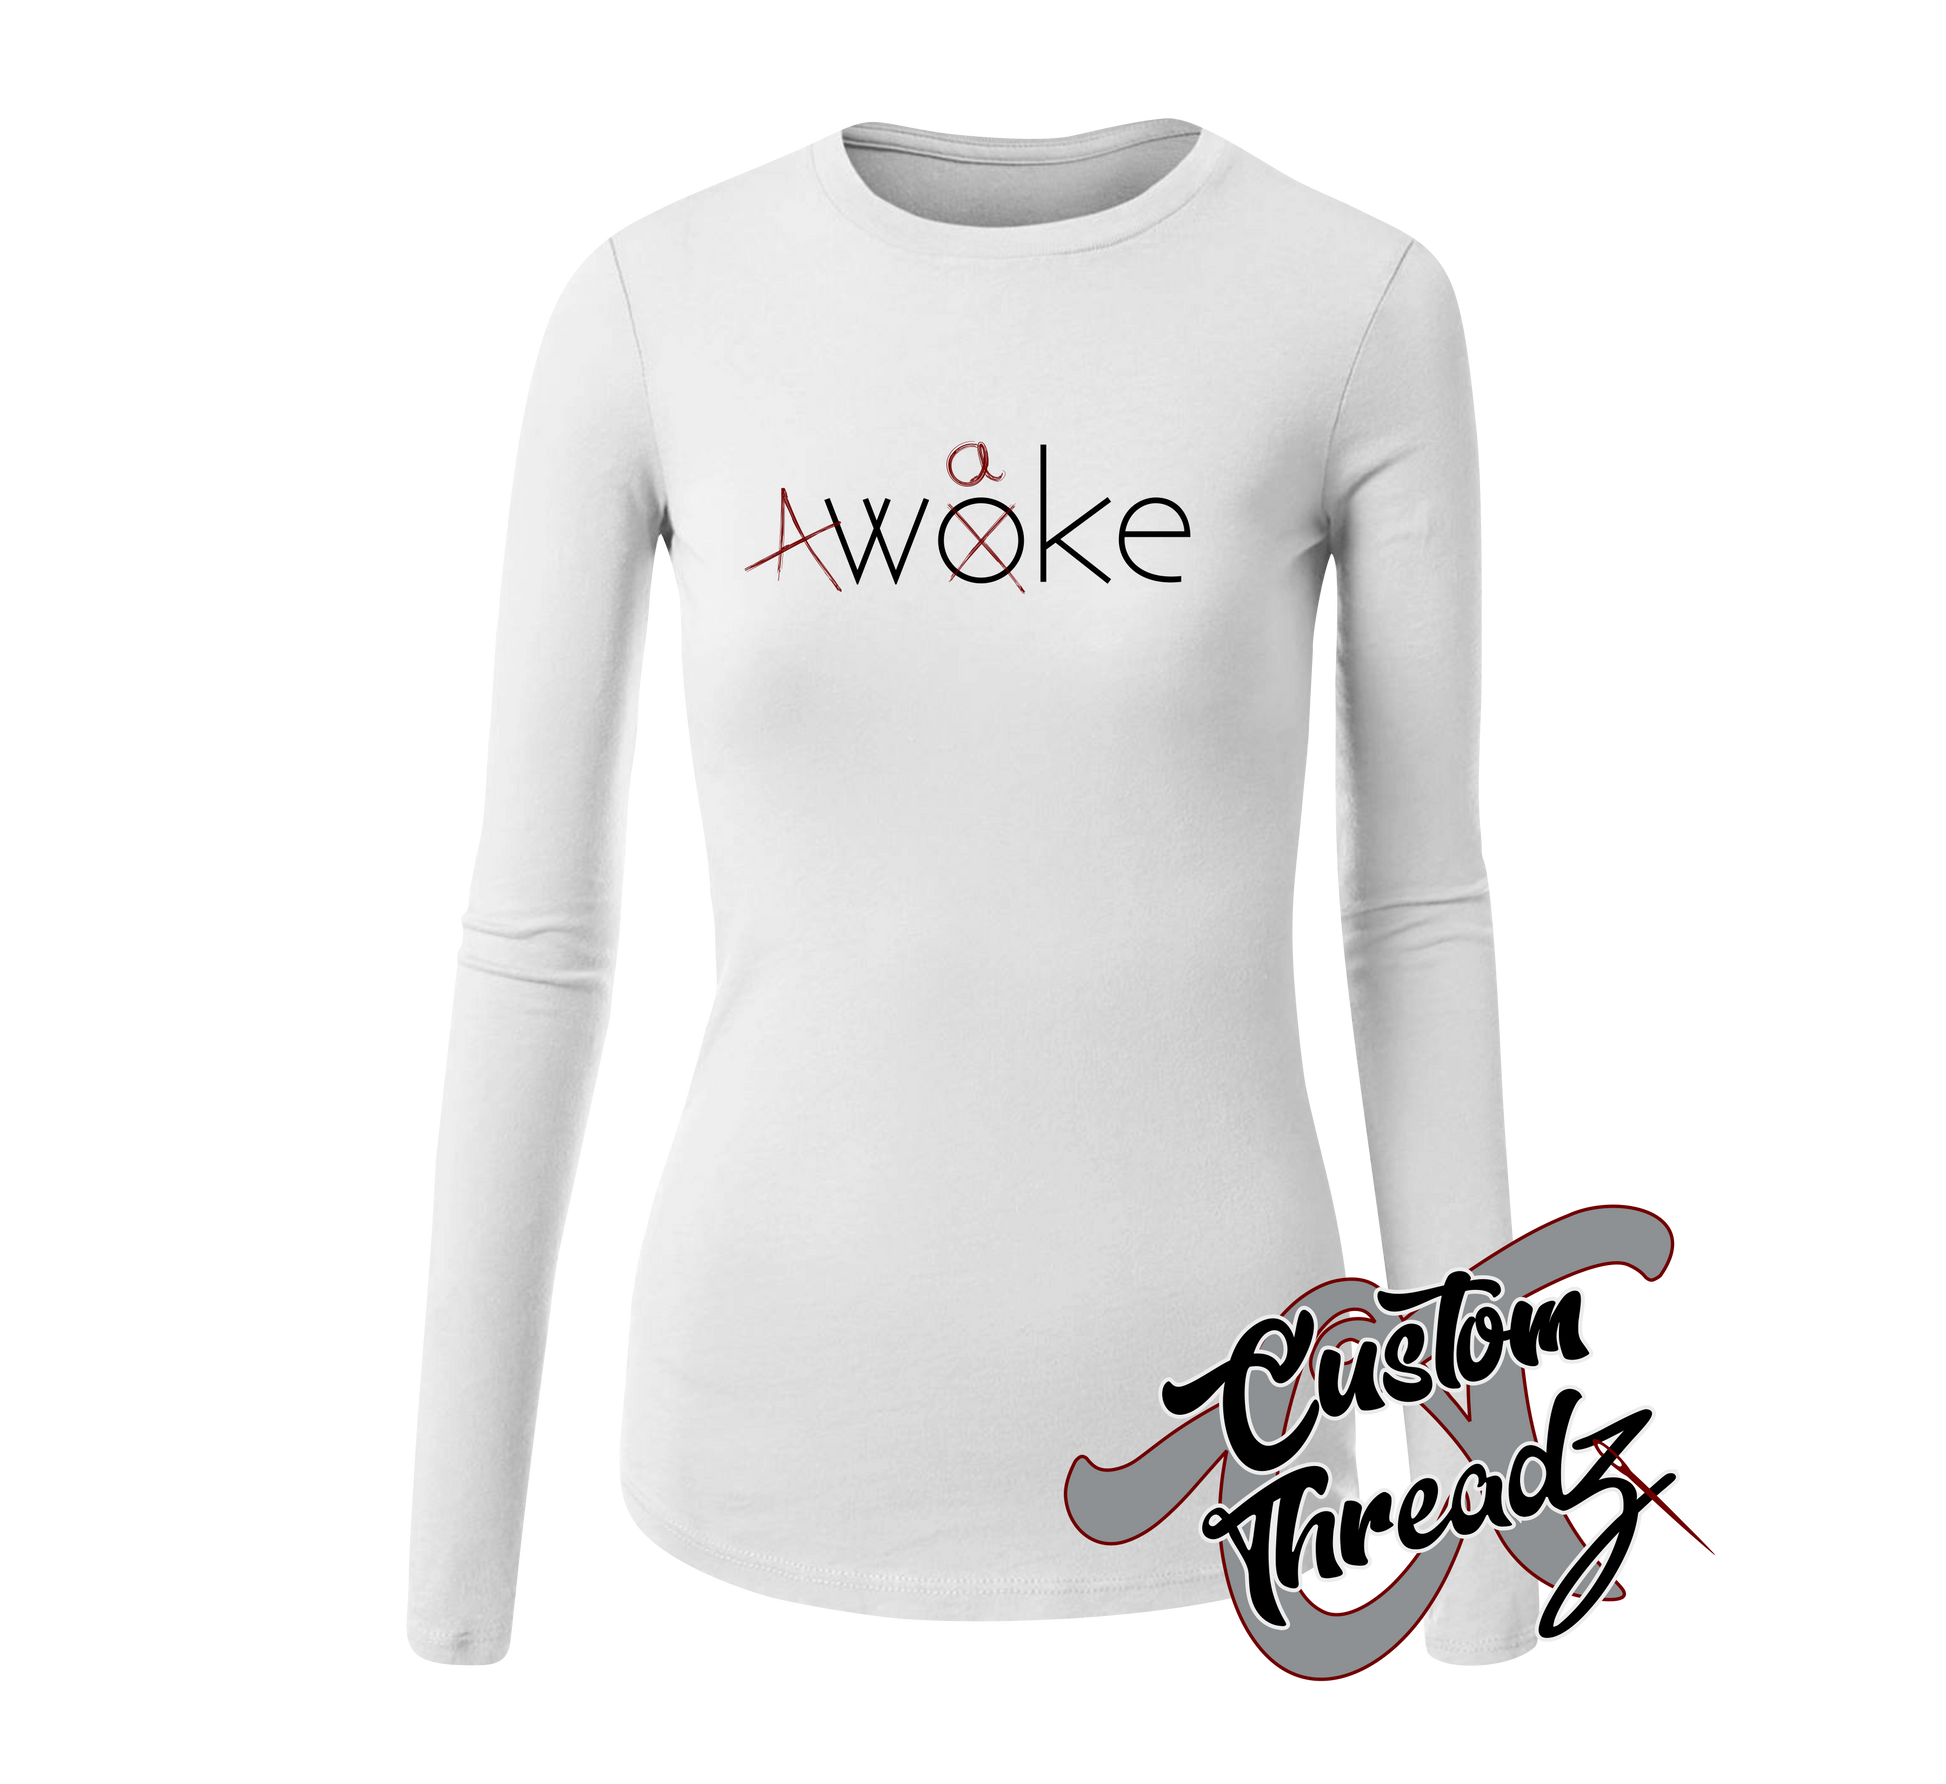 womens white long sleeve with A-woke DTG printed design